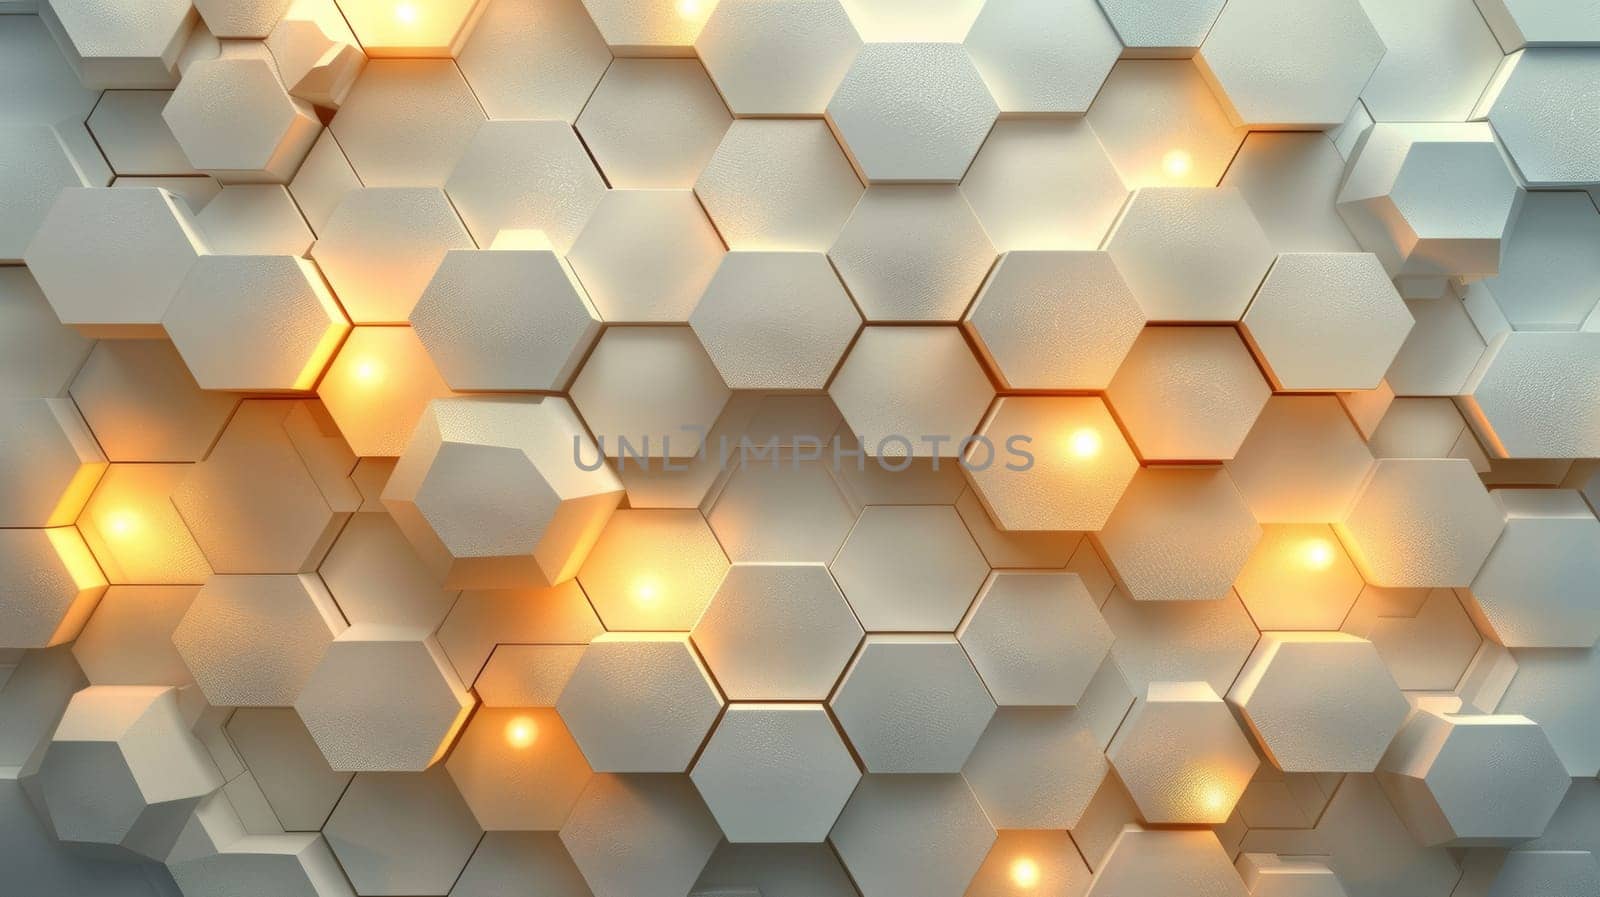 A white and yellow hexagonal pattern with lights on it, AI by starush